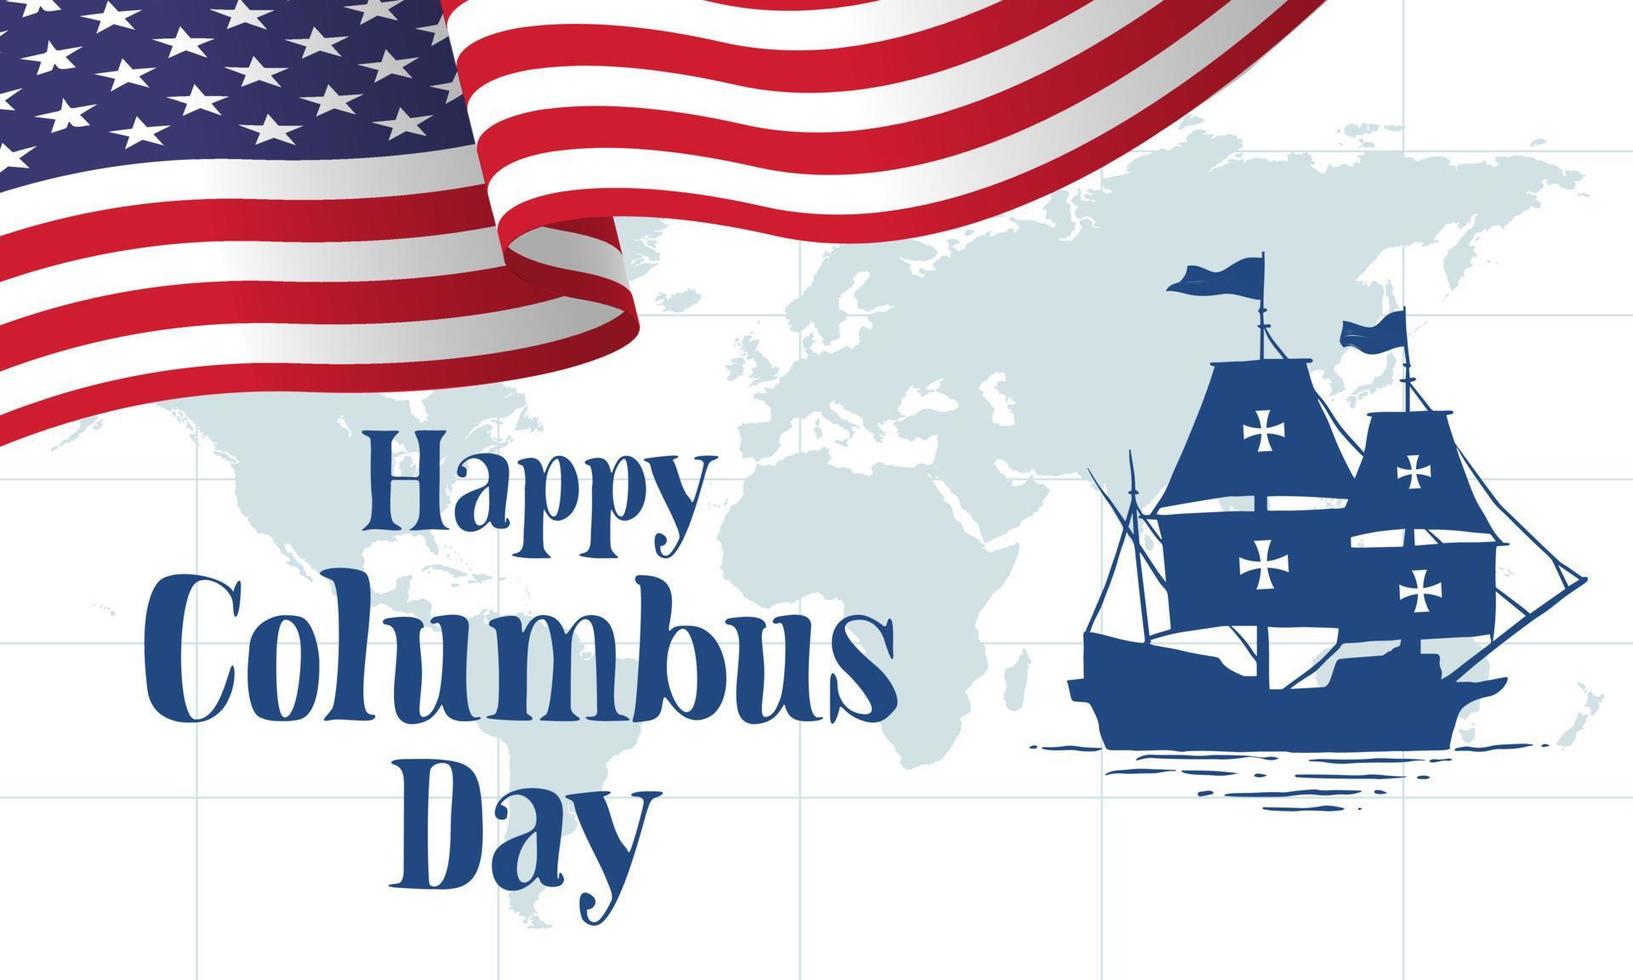 Columbus day greeting card or background. vector illustration.